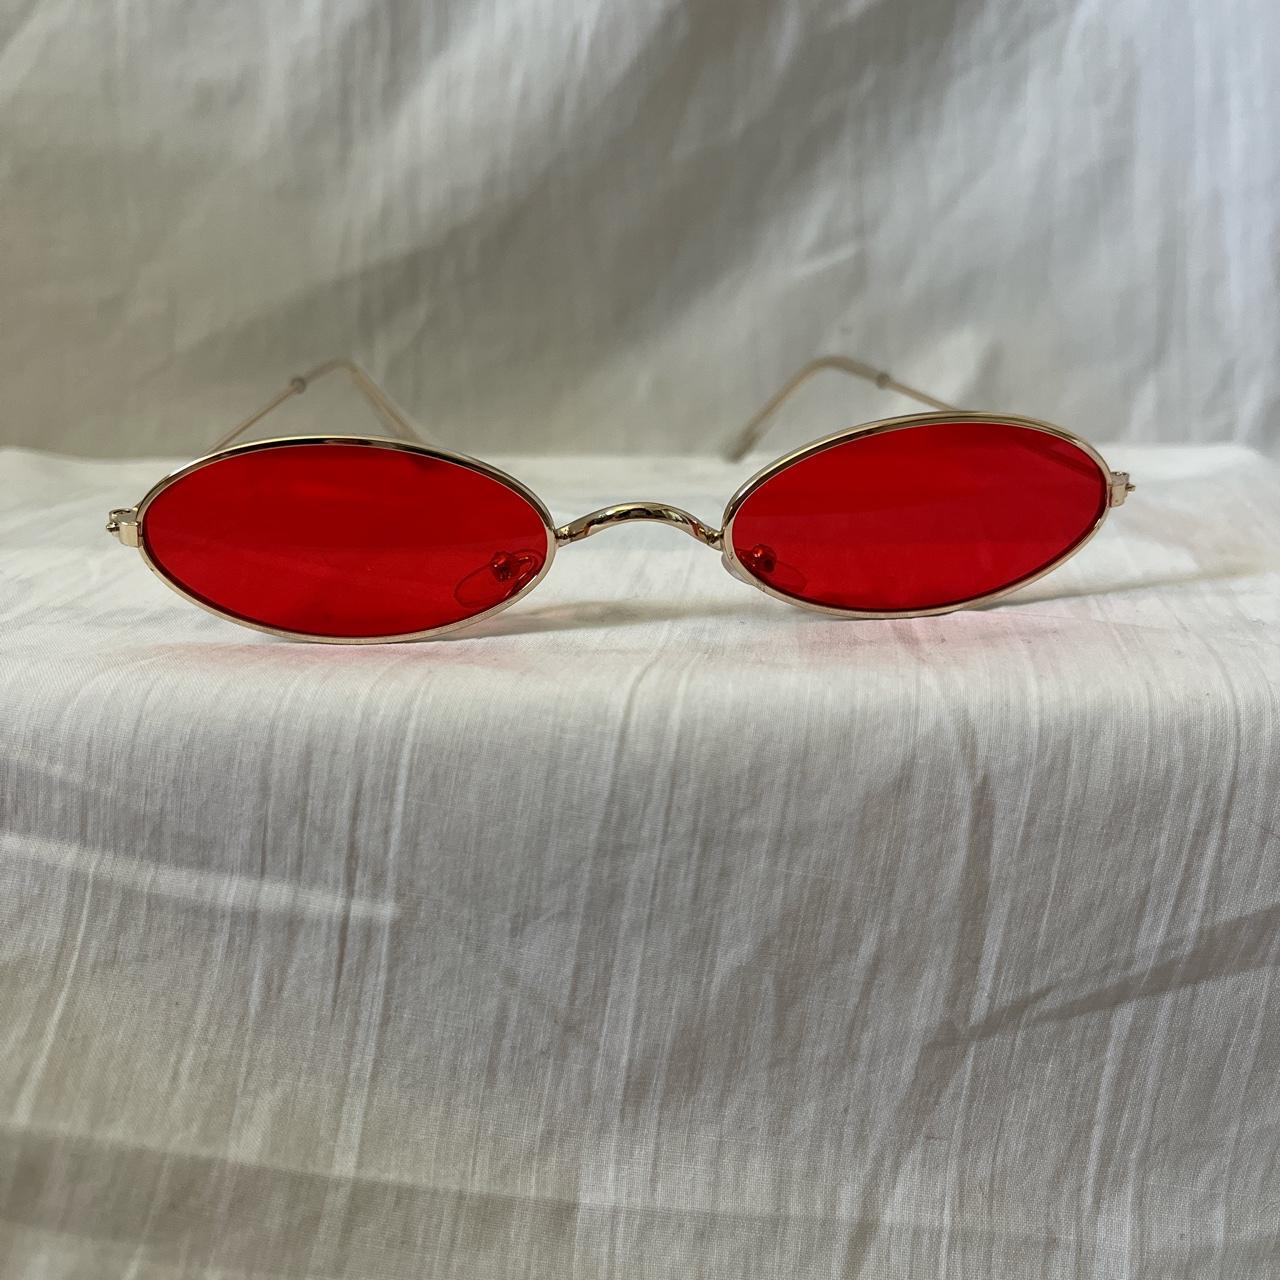 Women's Red and Gold Sunglasses | Depop